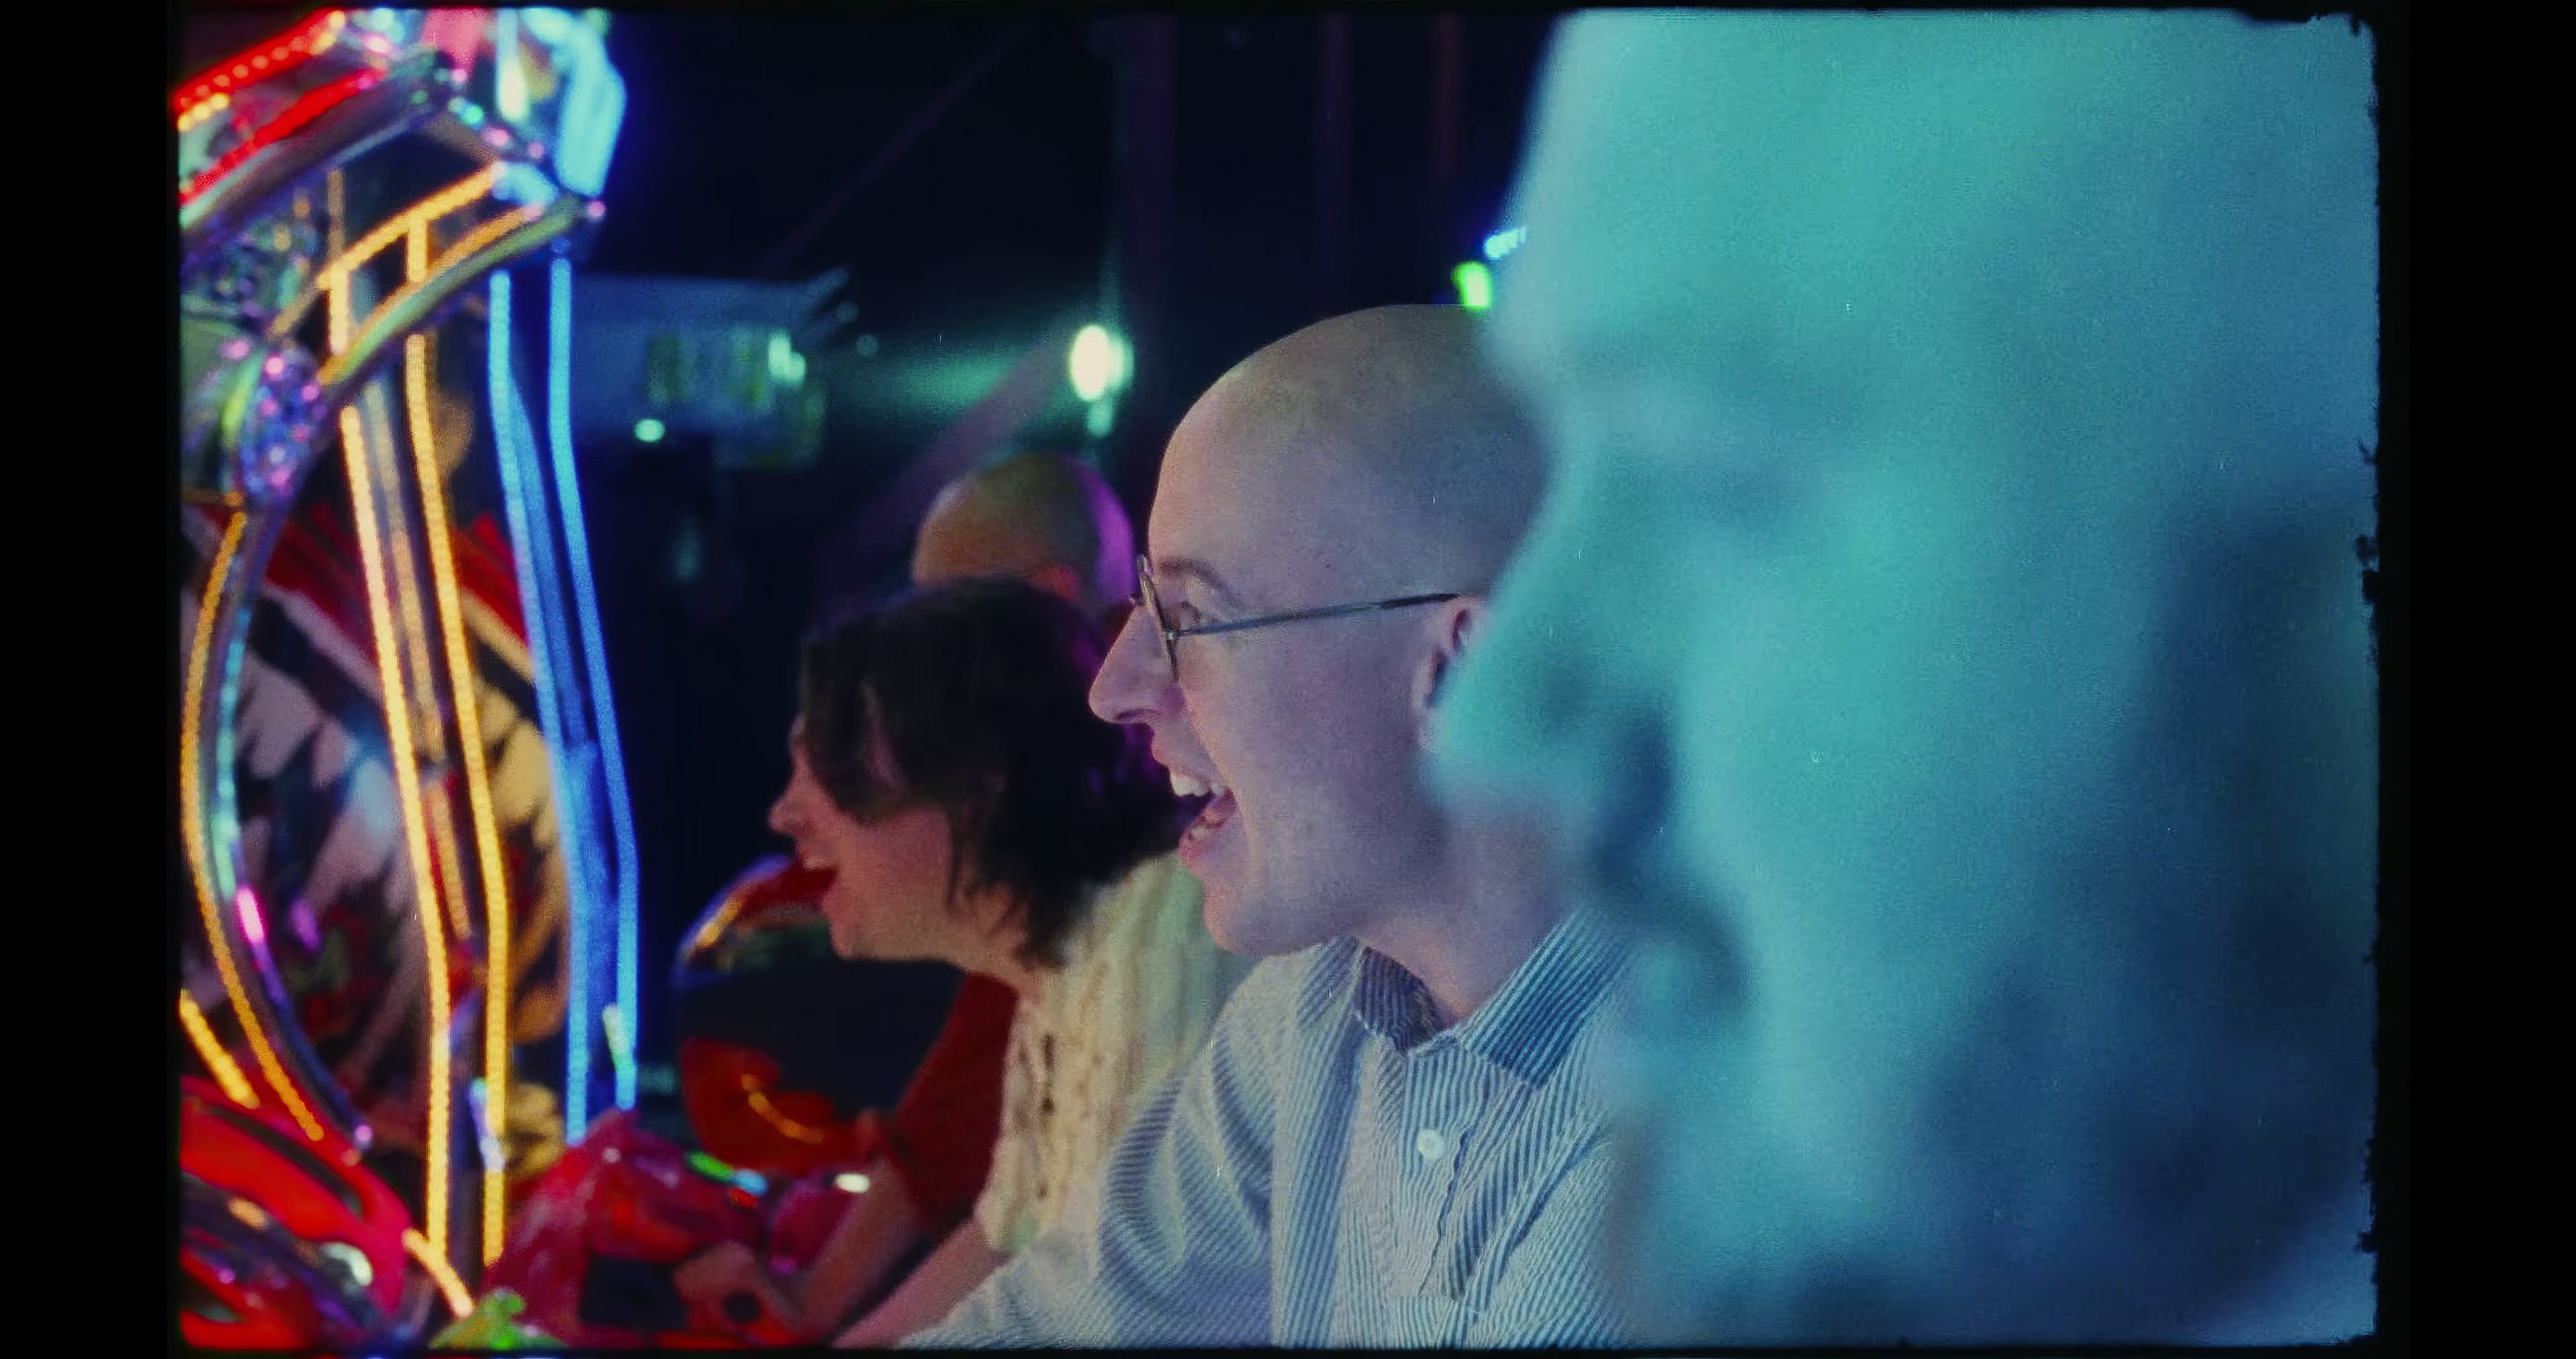 A still from Bombay Bicycle Club's music video 'Tekken 2' captures a moment of joy at an arcade. A person with a broad smile is playing a game, immersed in the experience. They're wearing glasses and a striped shirt, and the arcade's vibrant, colorful lights reflect in their glasses. The image conveys a sense of nostalgia and the simple pleasure of gaming in a lively, neon-lit setting.